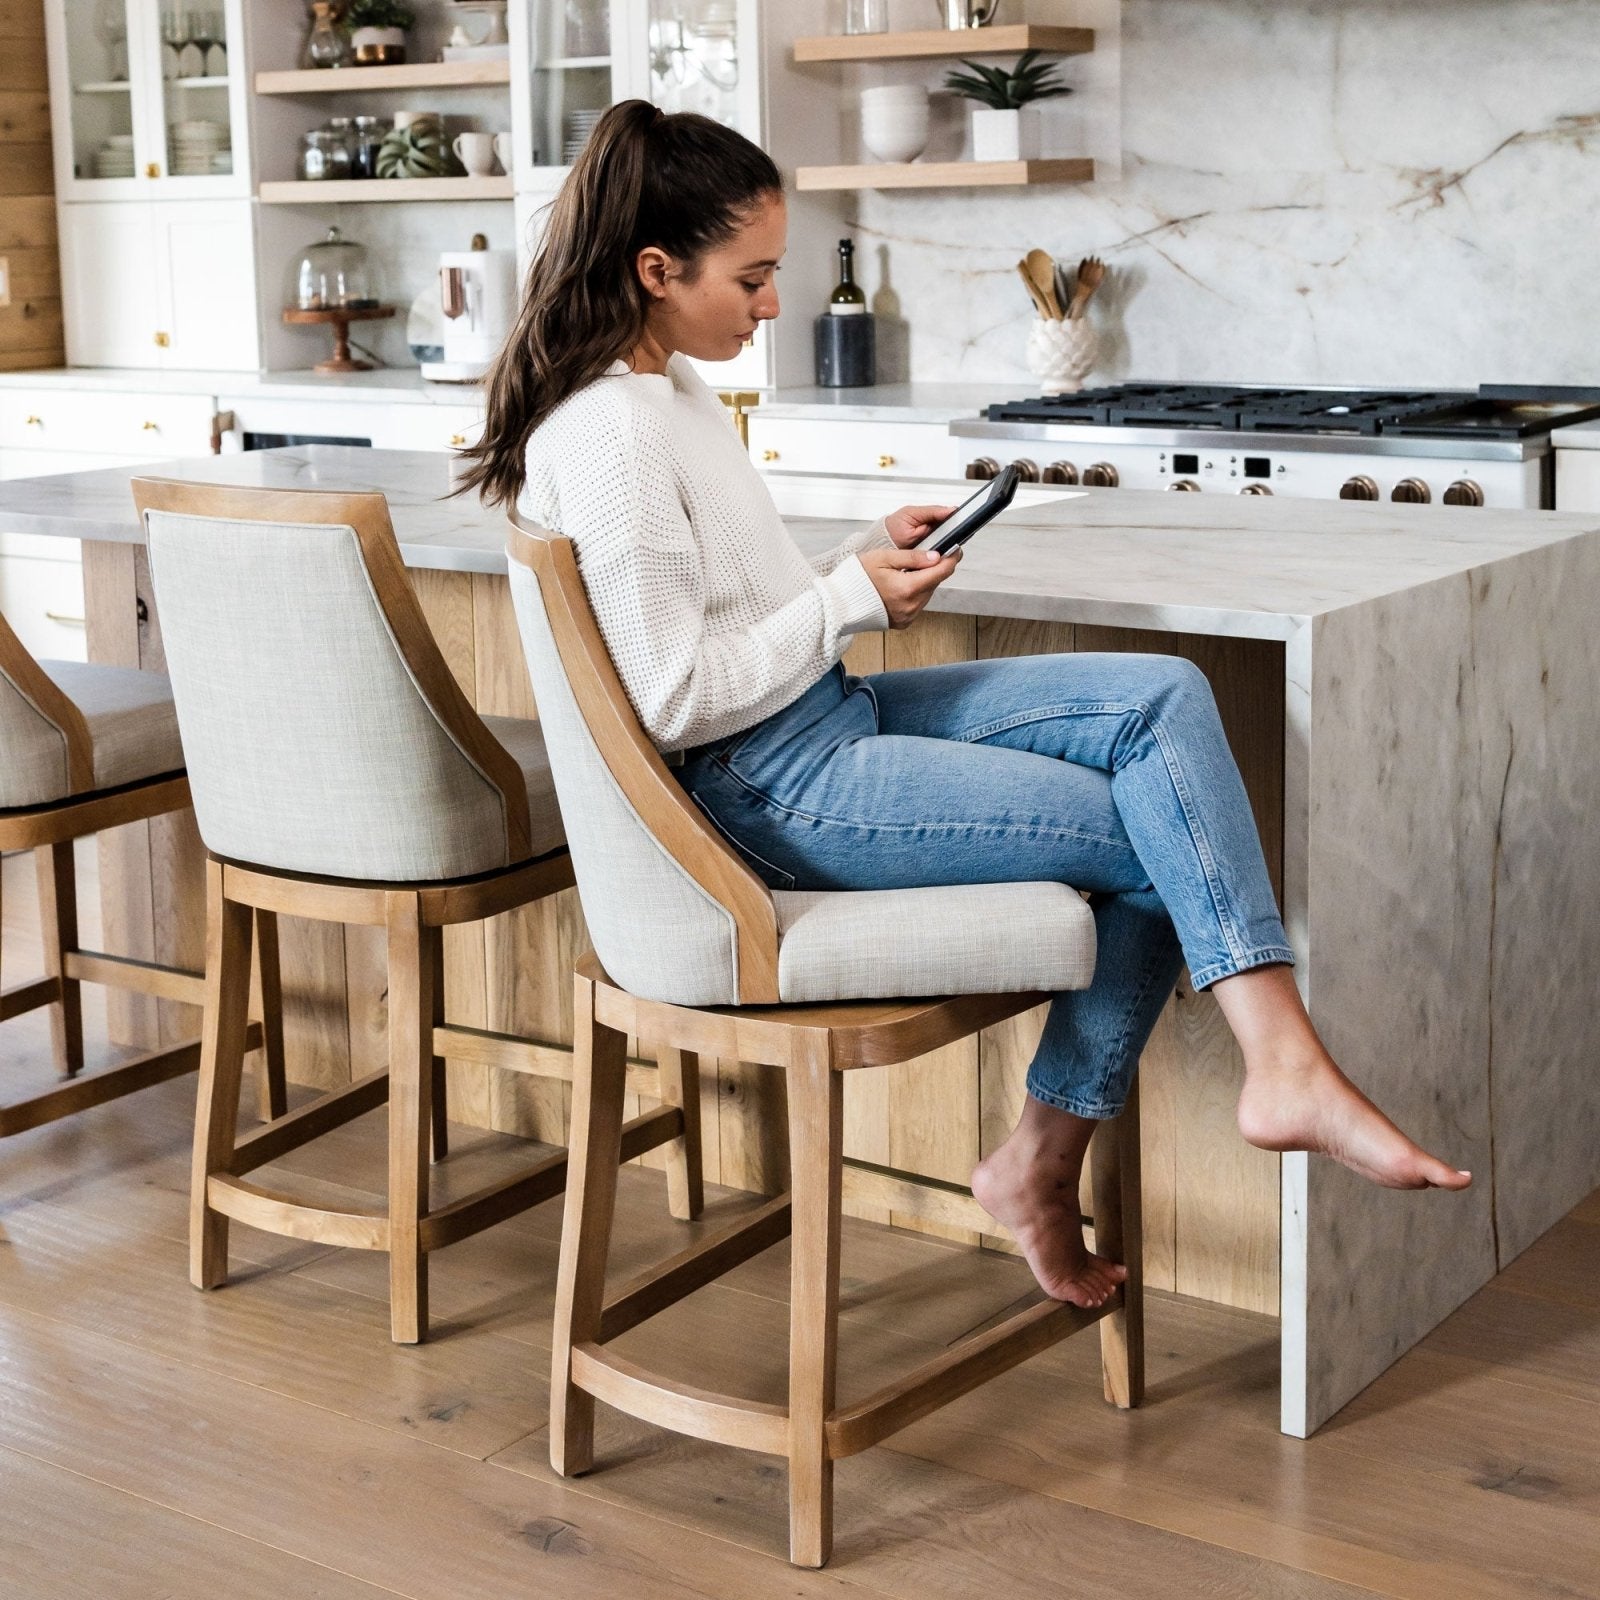 Vienna Bar Stool in Weathered Oak Finish with Sand Color Fabric Upholstery in Stools by Maven Lane